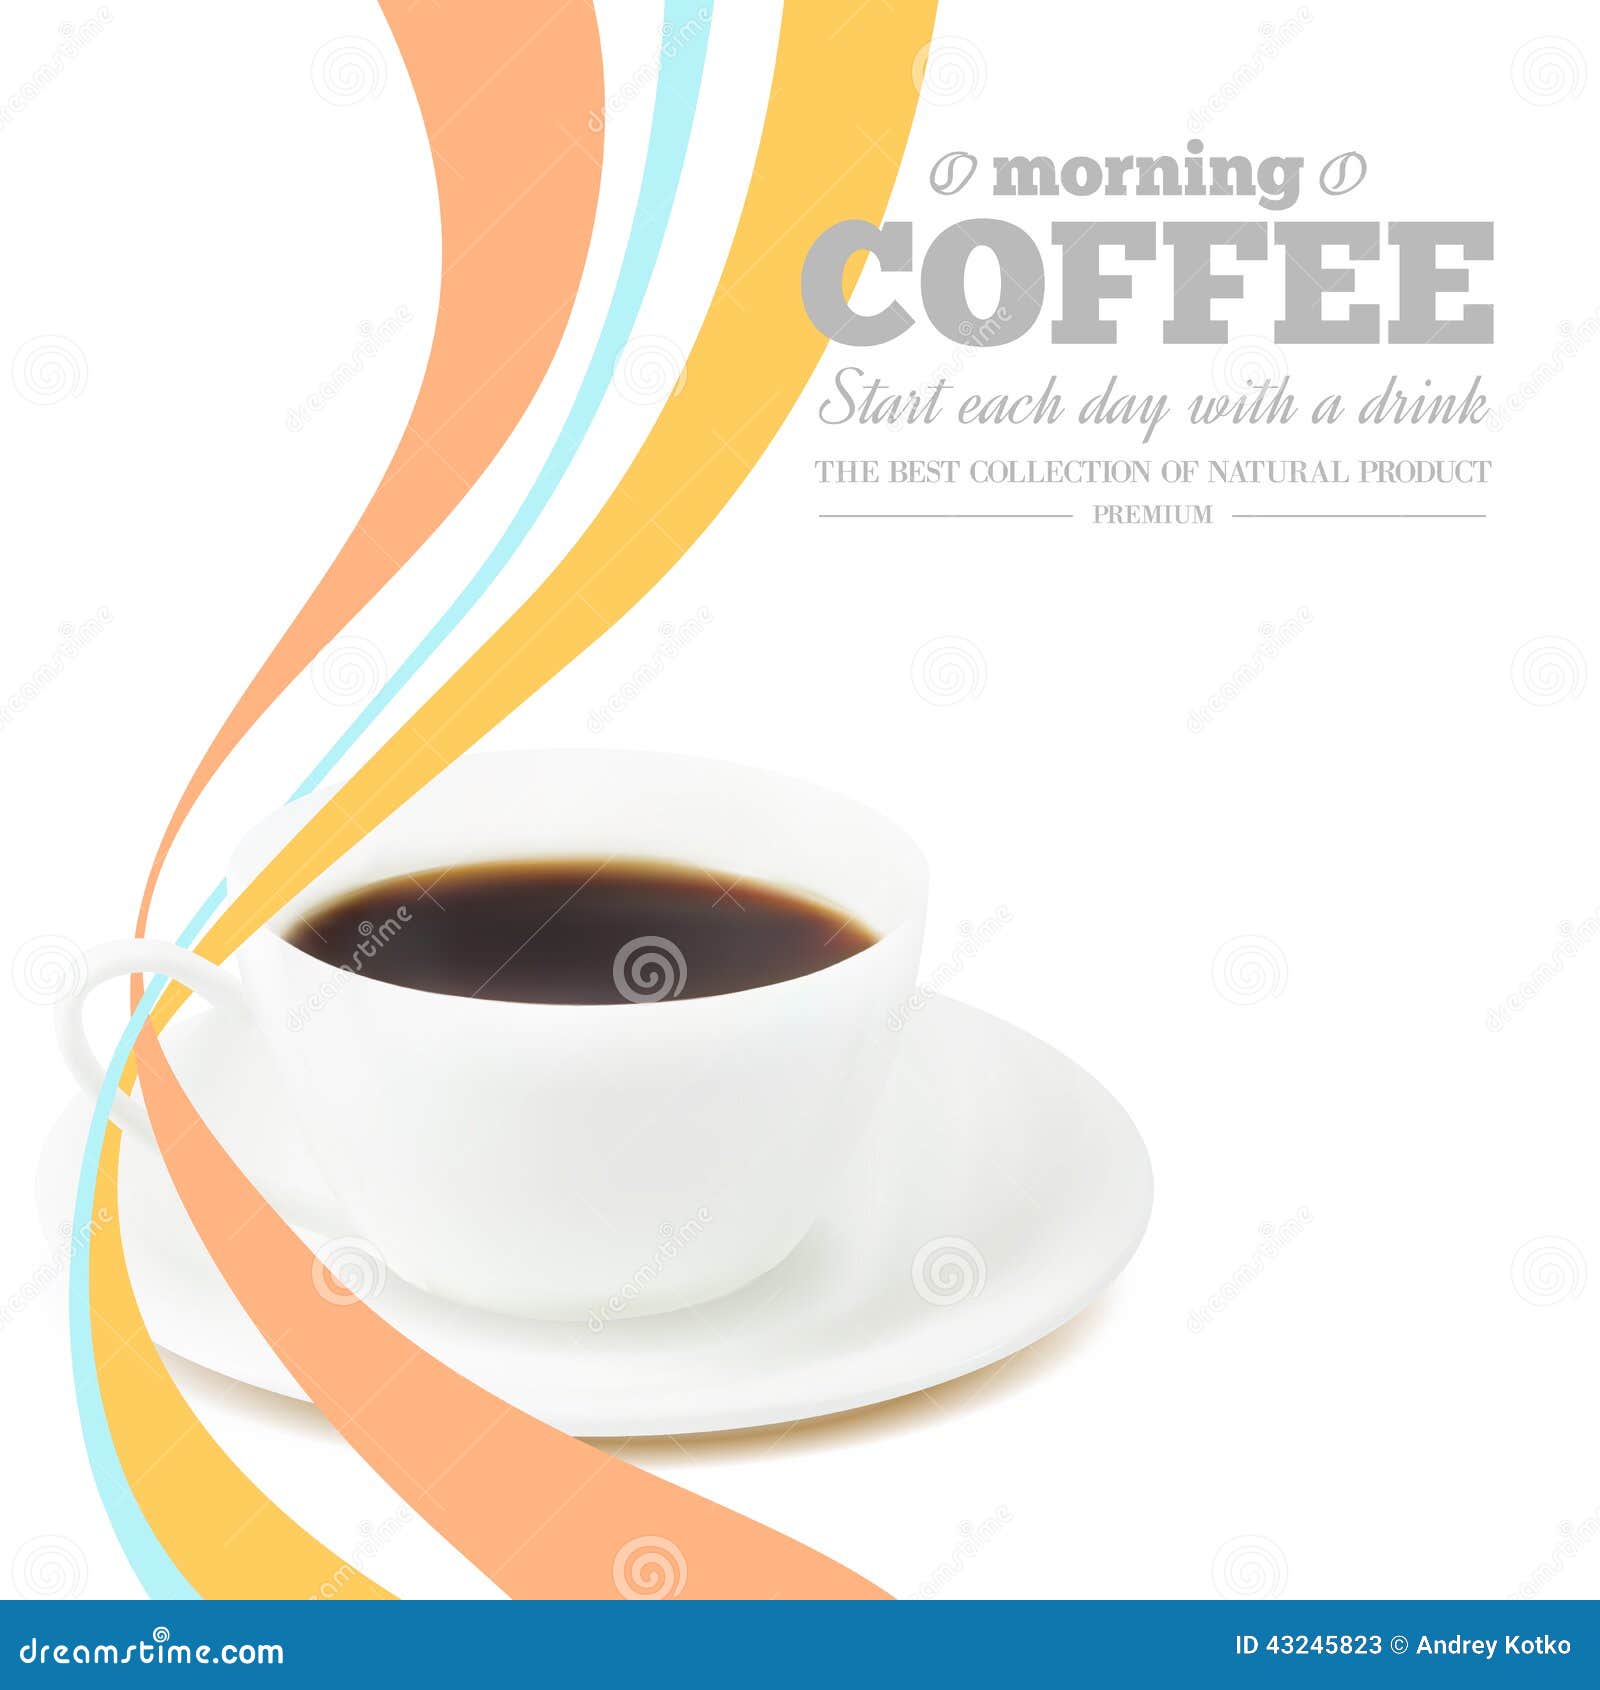 clipart coffee morning - photo #17